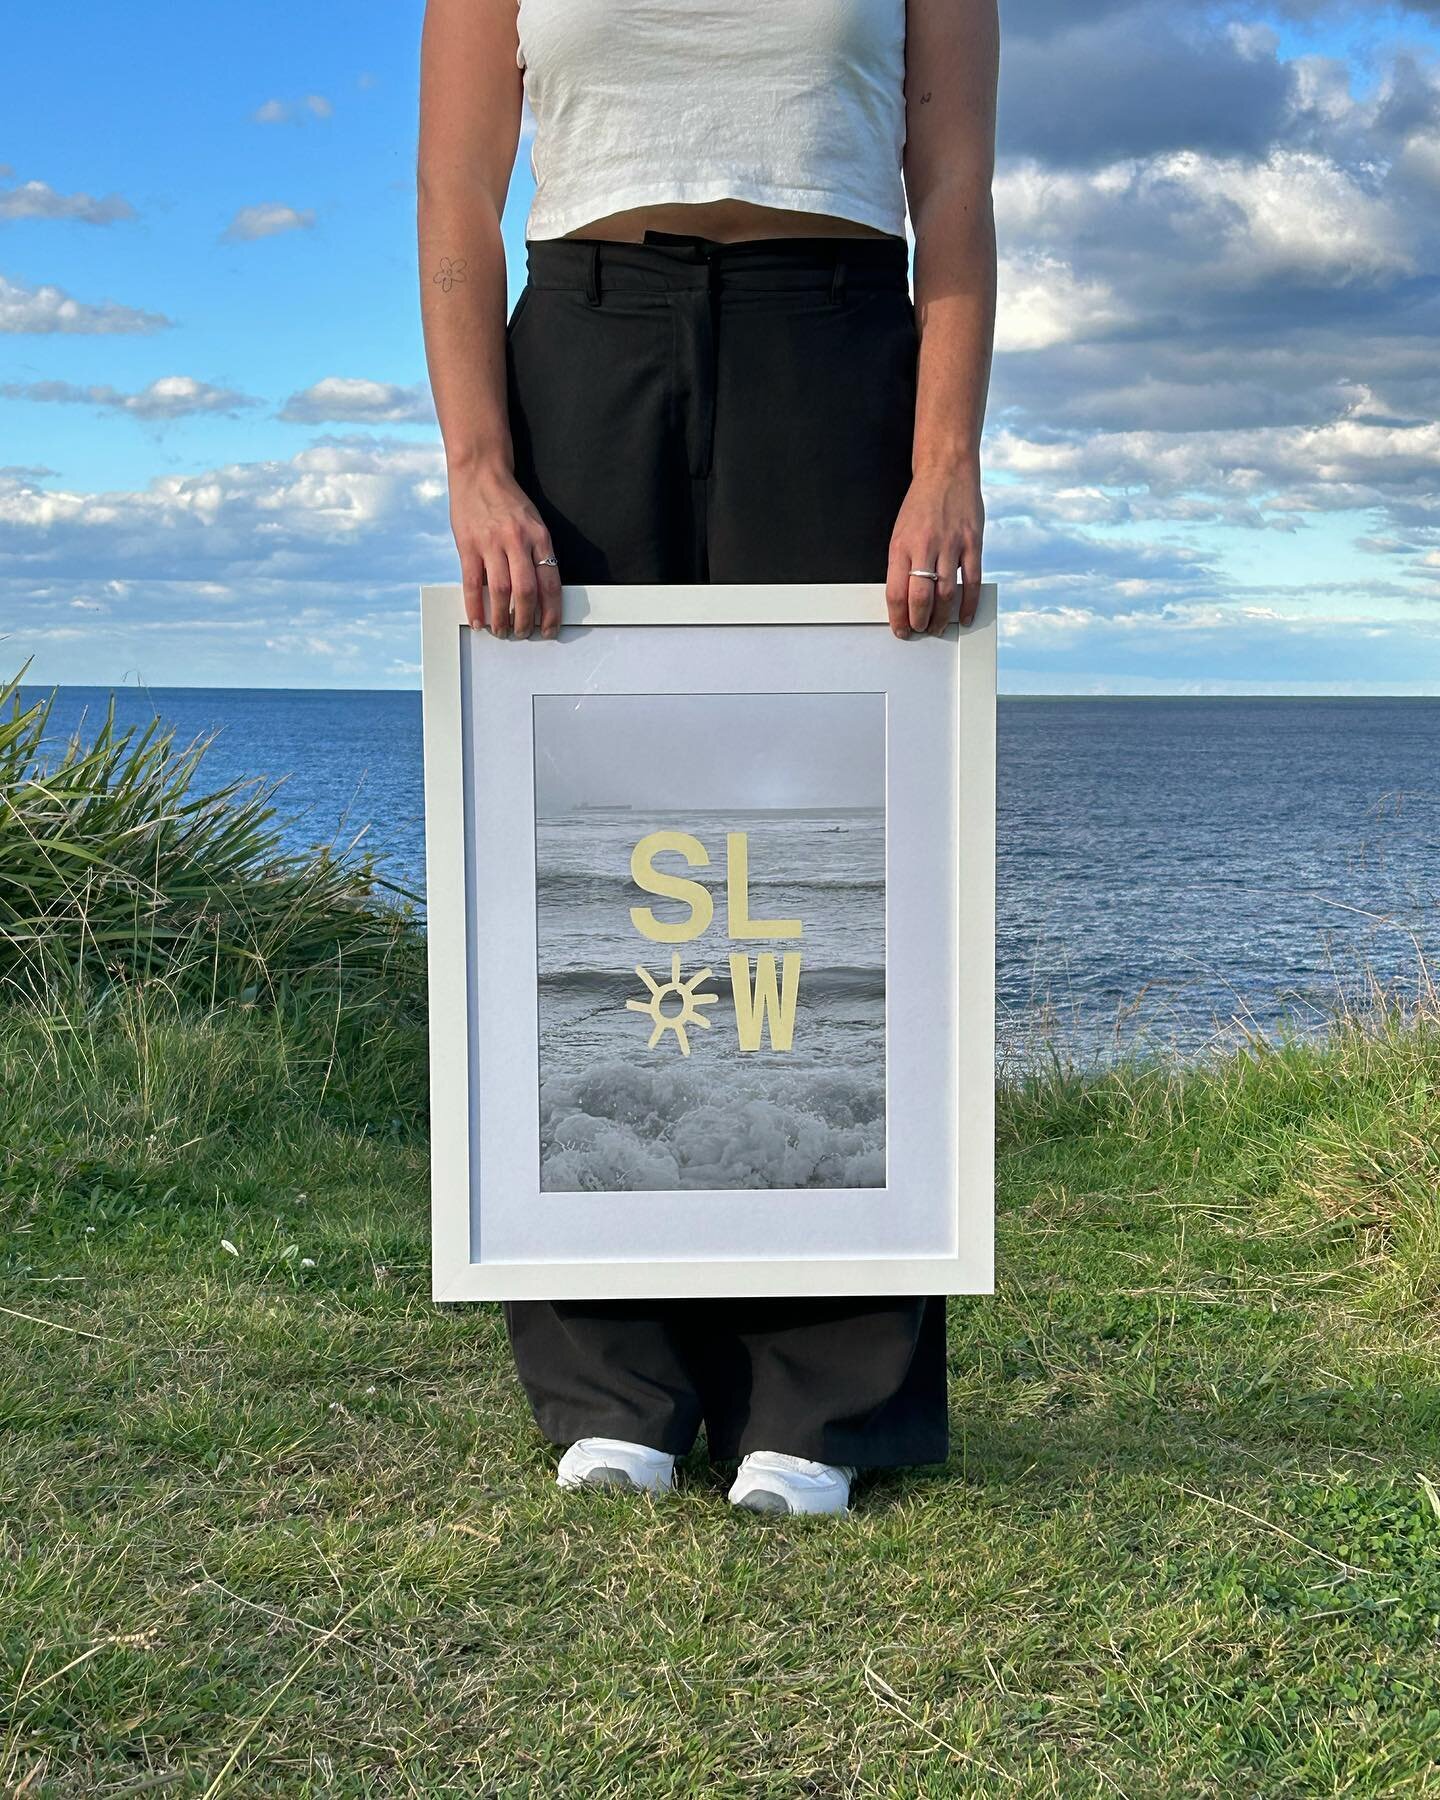 SLOW - an @amourd__photo exhibition opening tomorrow night at @sociallifeberry ft. a collaboration of original artworks by @studielle.creative and photography by my gal @amourd__photo 

Come along to the opening night in Berry @sociallifeberry from 6